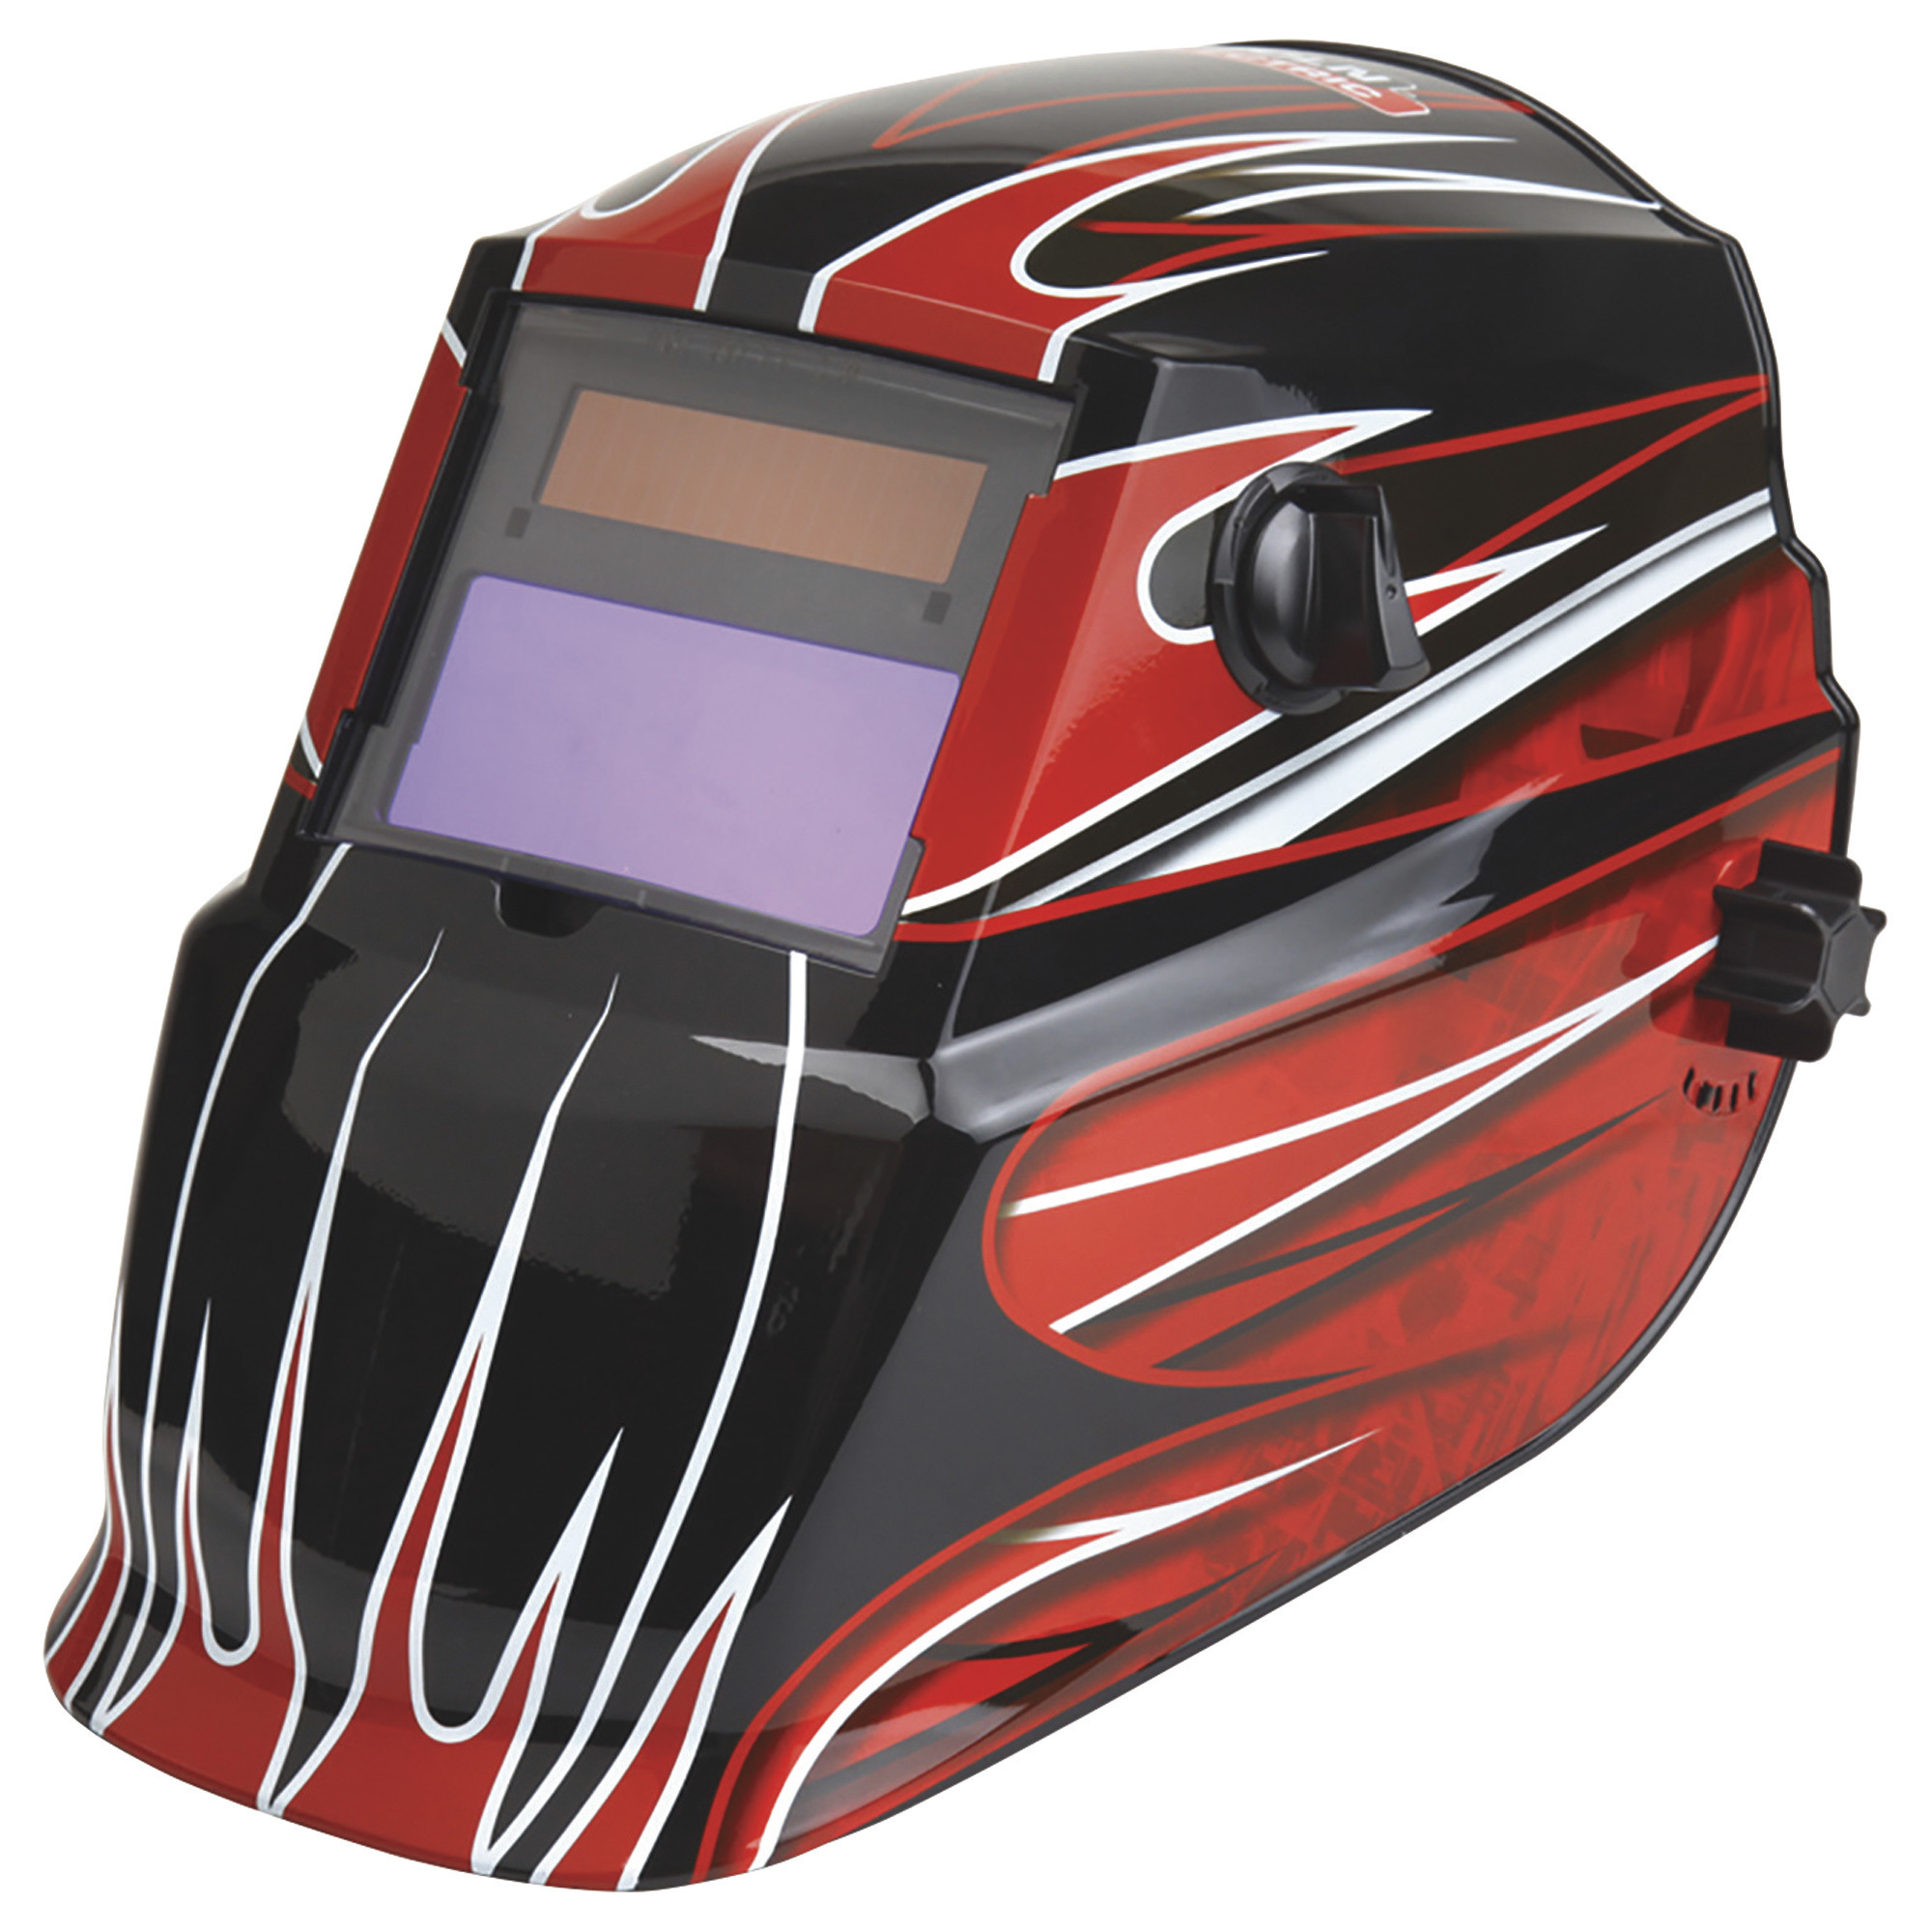 Lincoln Electric Auto-Darkening Variable Shade Welding Helmet with Grind Mode-- Fierce Red Graphic Pattern, Model K3063-1